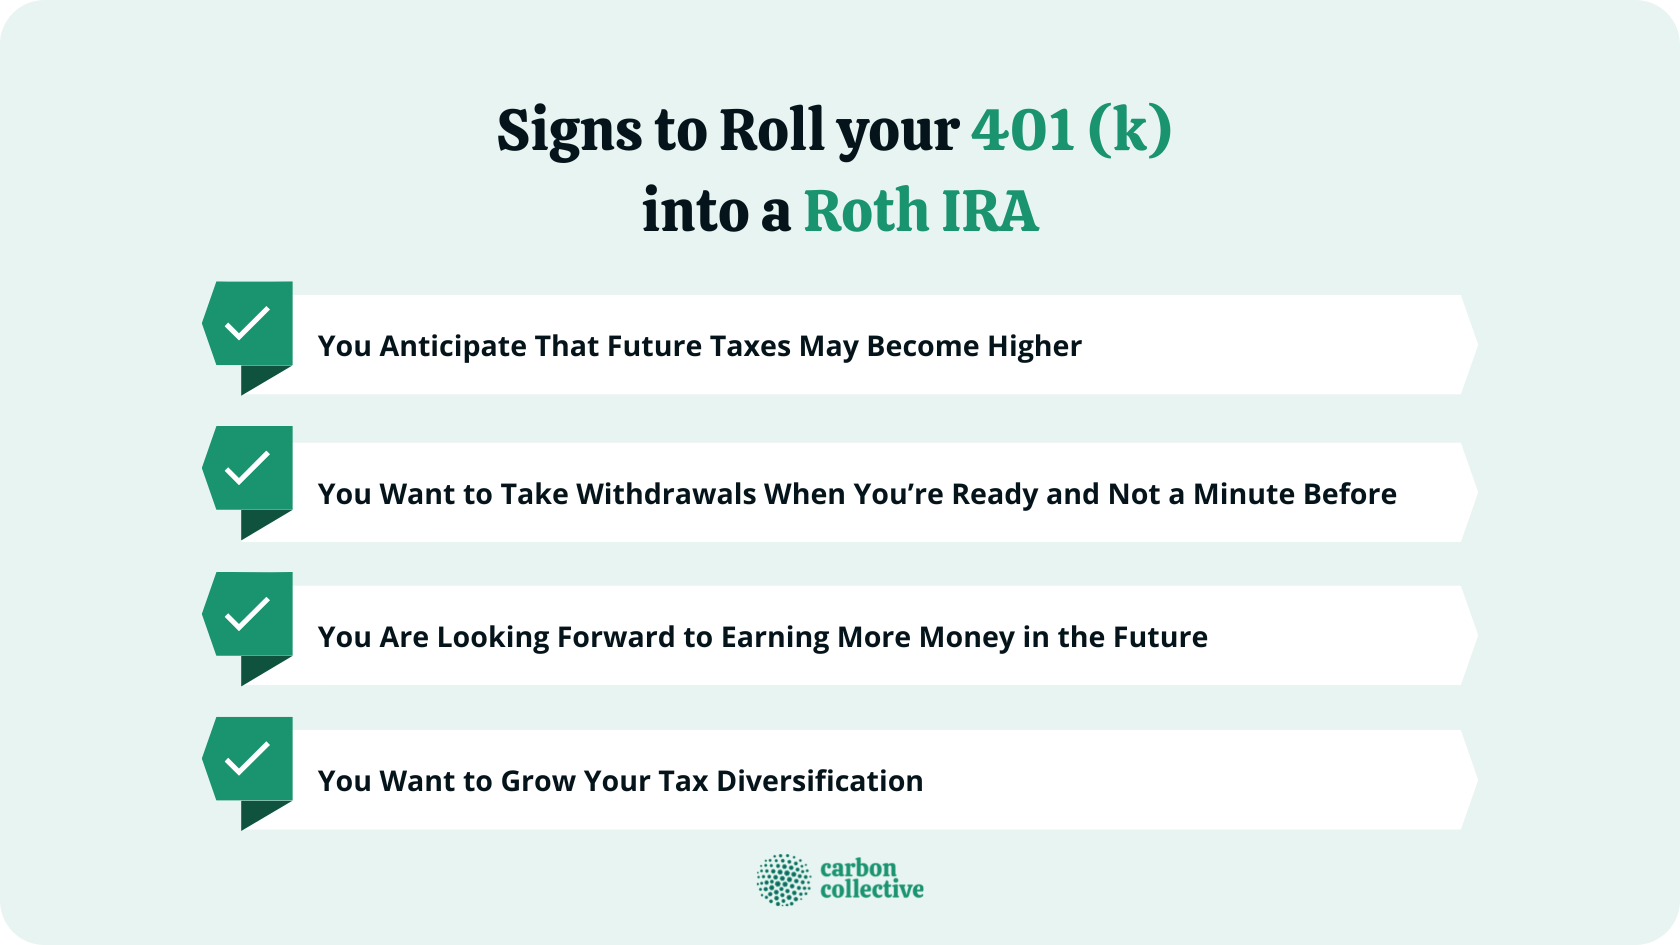 How To Convert Retirement Funds From A 401(k) To A Roth Ira for Beginners